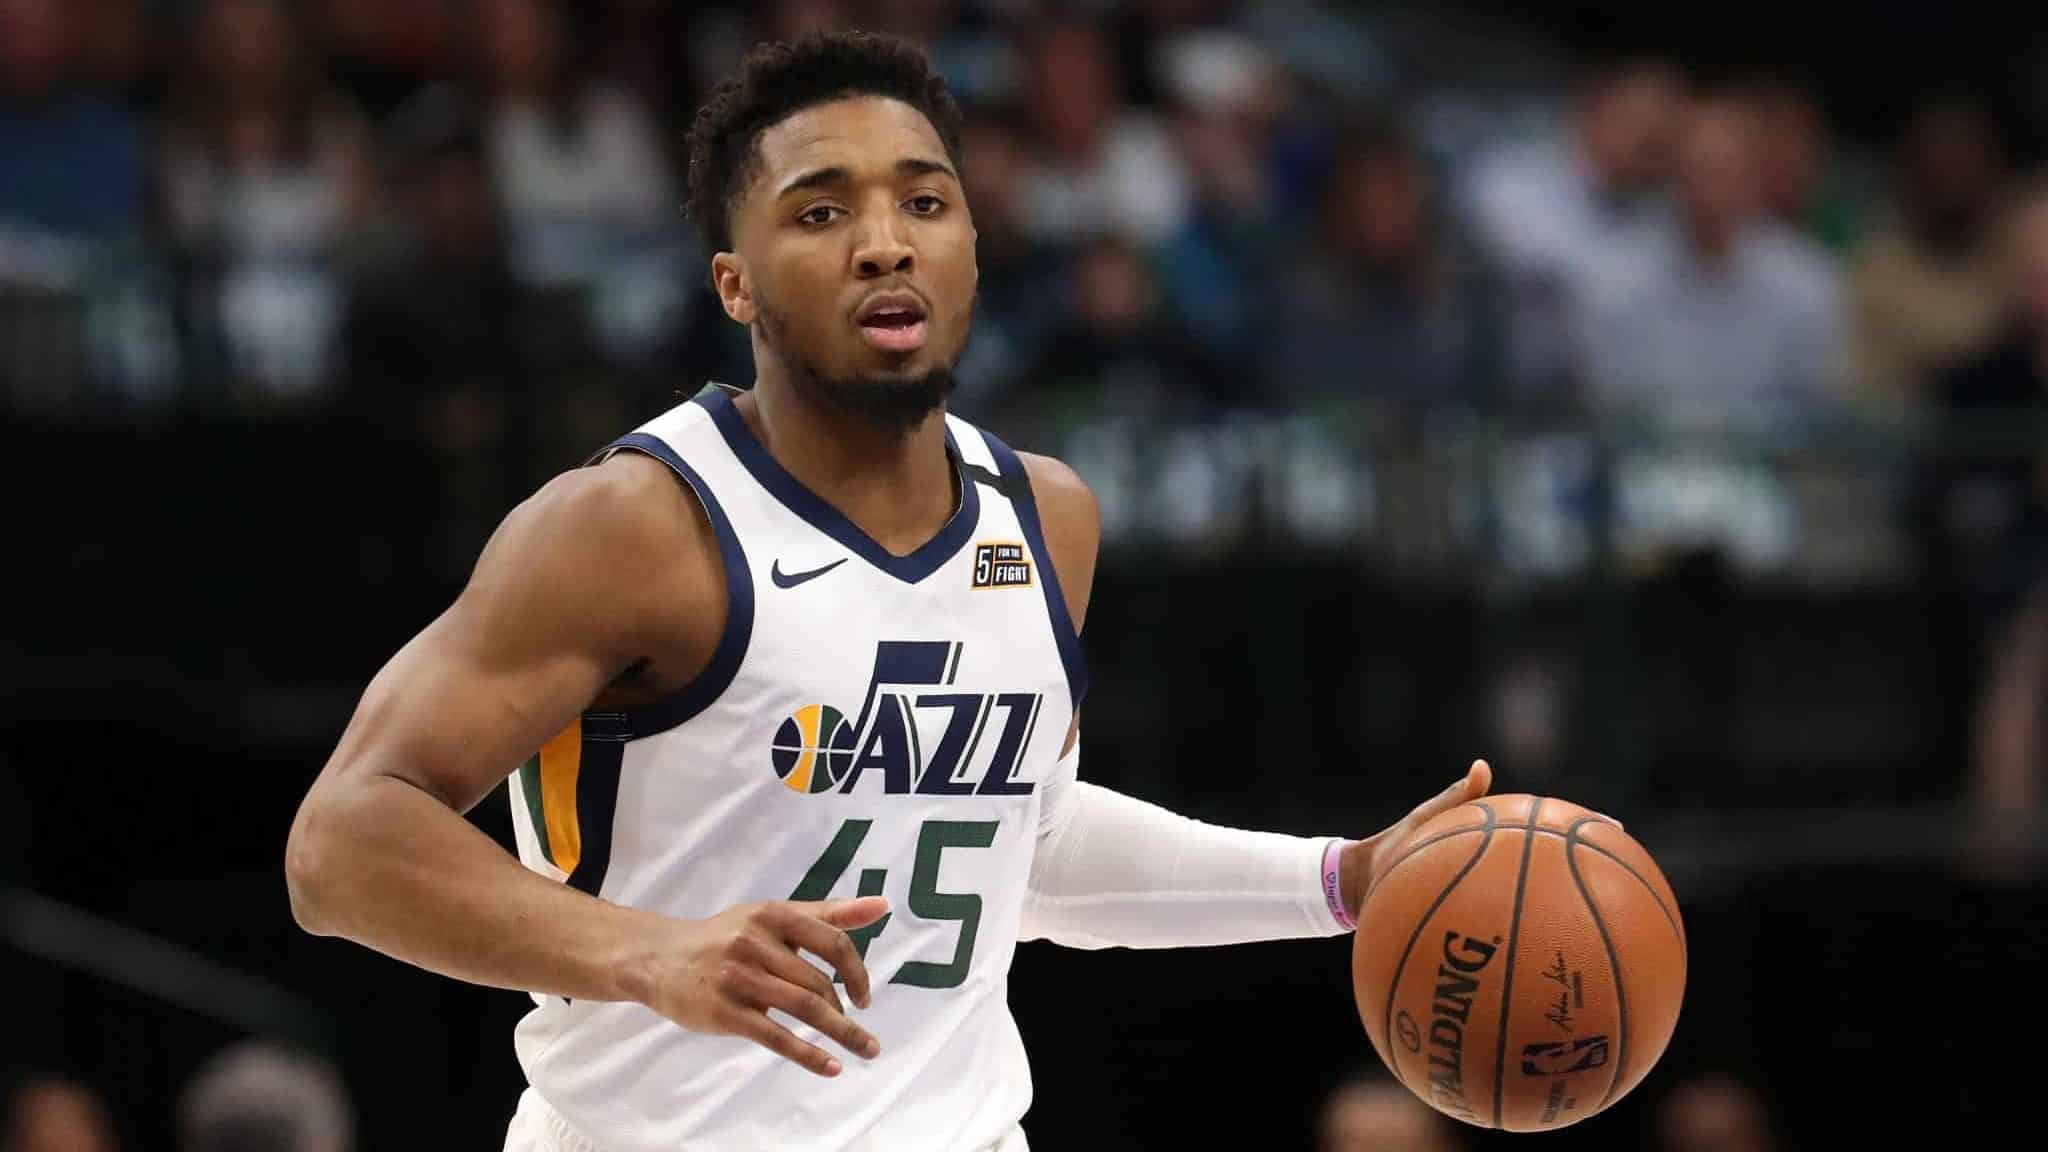 DALLAS, TEXAS - FEBRUARY 10: Donovan Mitchell #45 of the Utah Jazz at American Airlines Center on February 10, 2020 in Dallas, Texas. NOTE TO USER: User expressly acknowledges and agrees that, by downloading and or using this photograph, User is consenting to the terms and conditions of the Getty Images License Agreement.